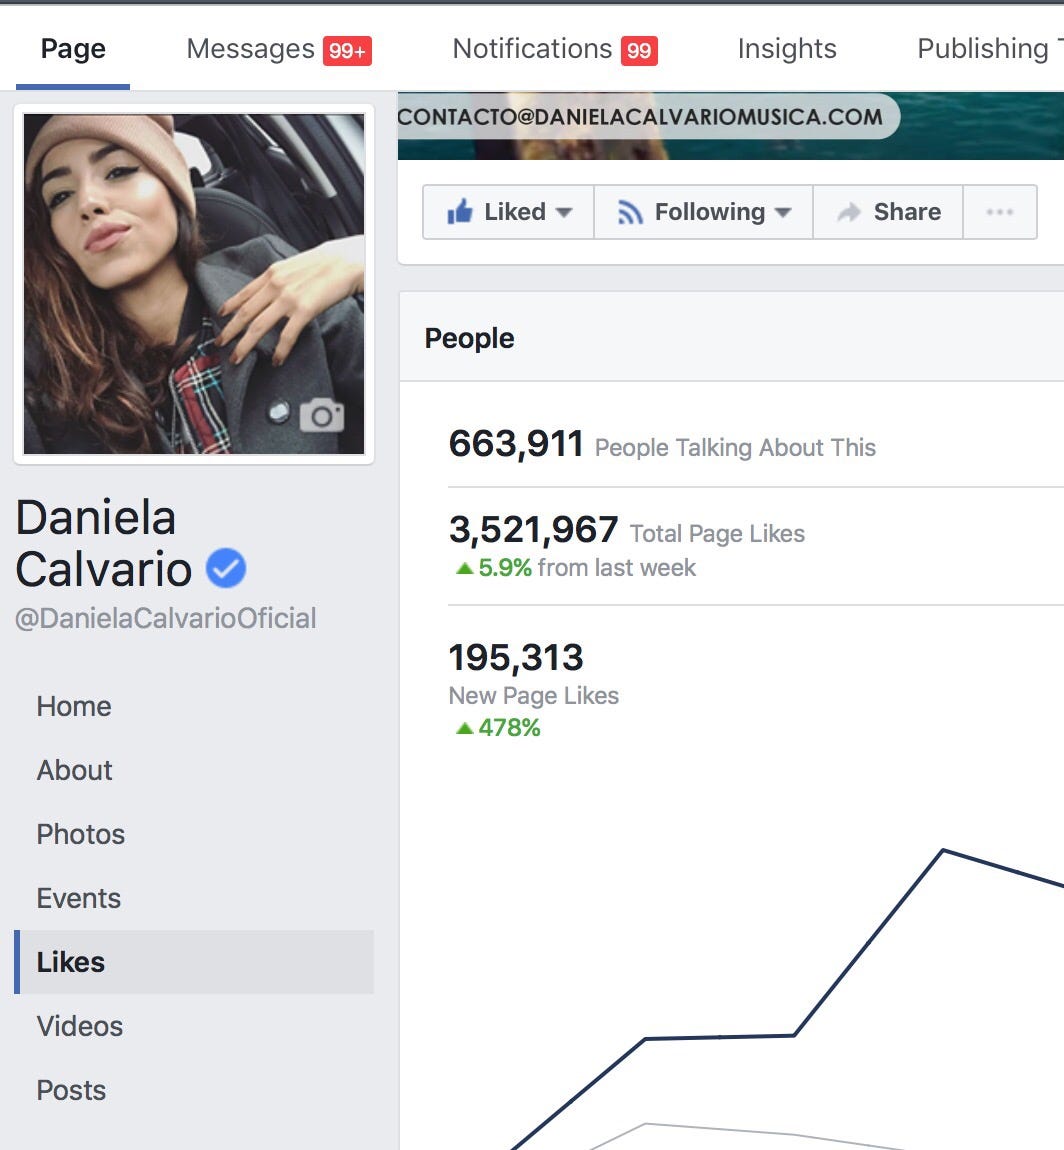 How we built an artist from 20k followers to 3.5 million followers  utilizing paid and organic advertising on Facebook, by Louis X9